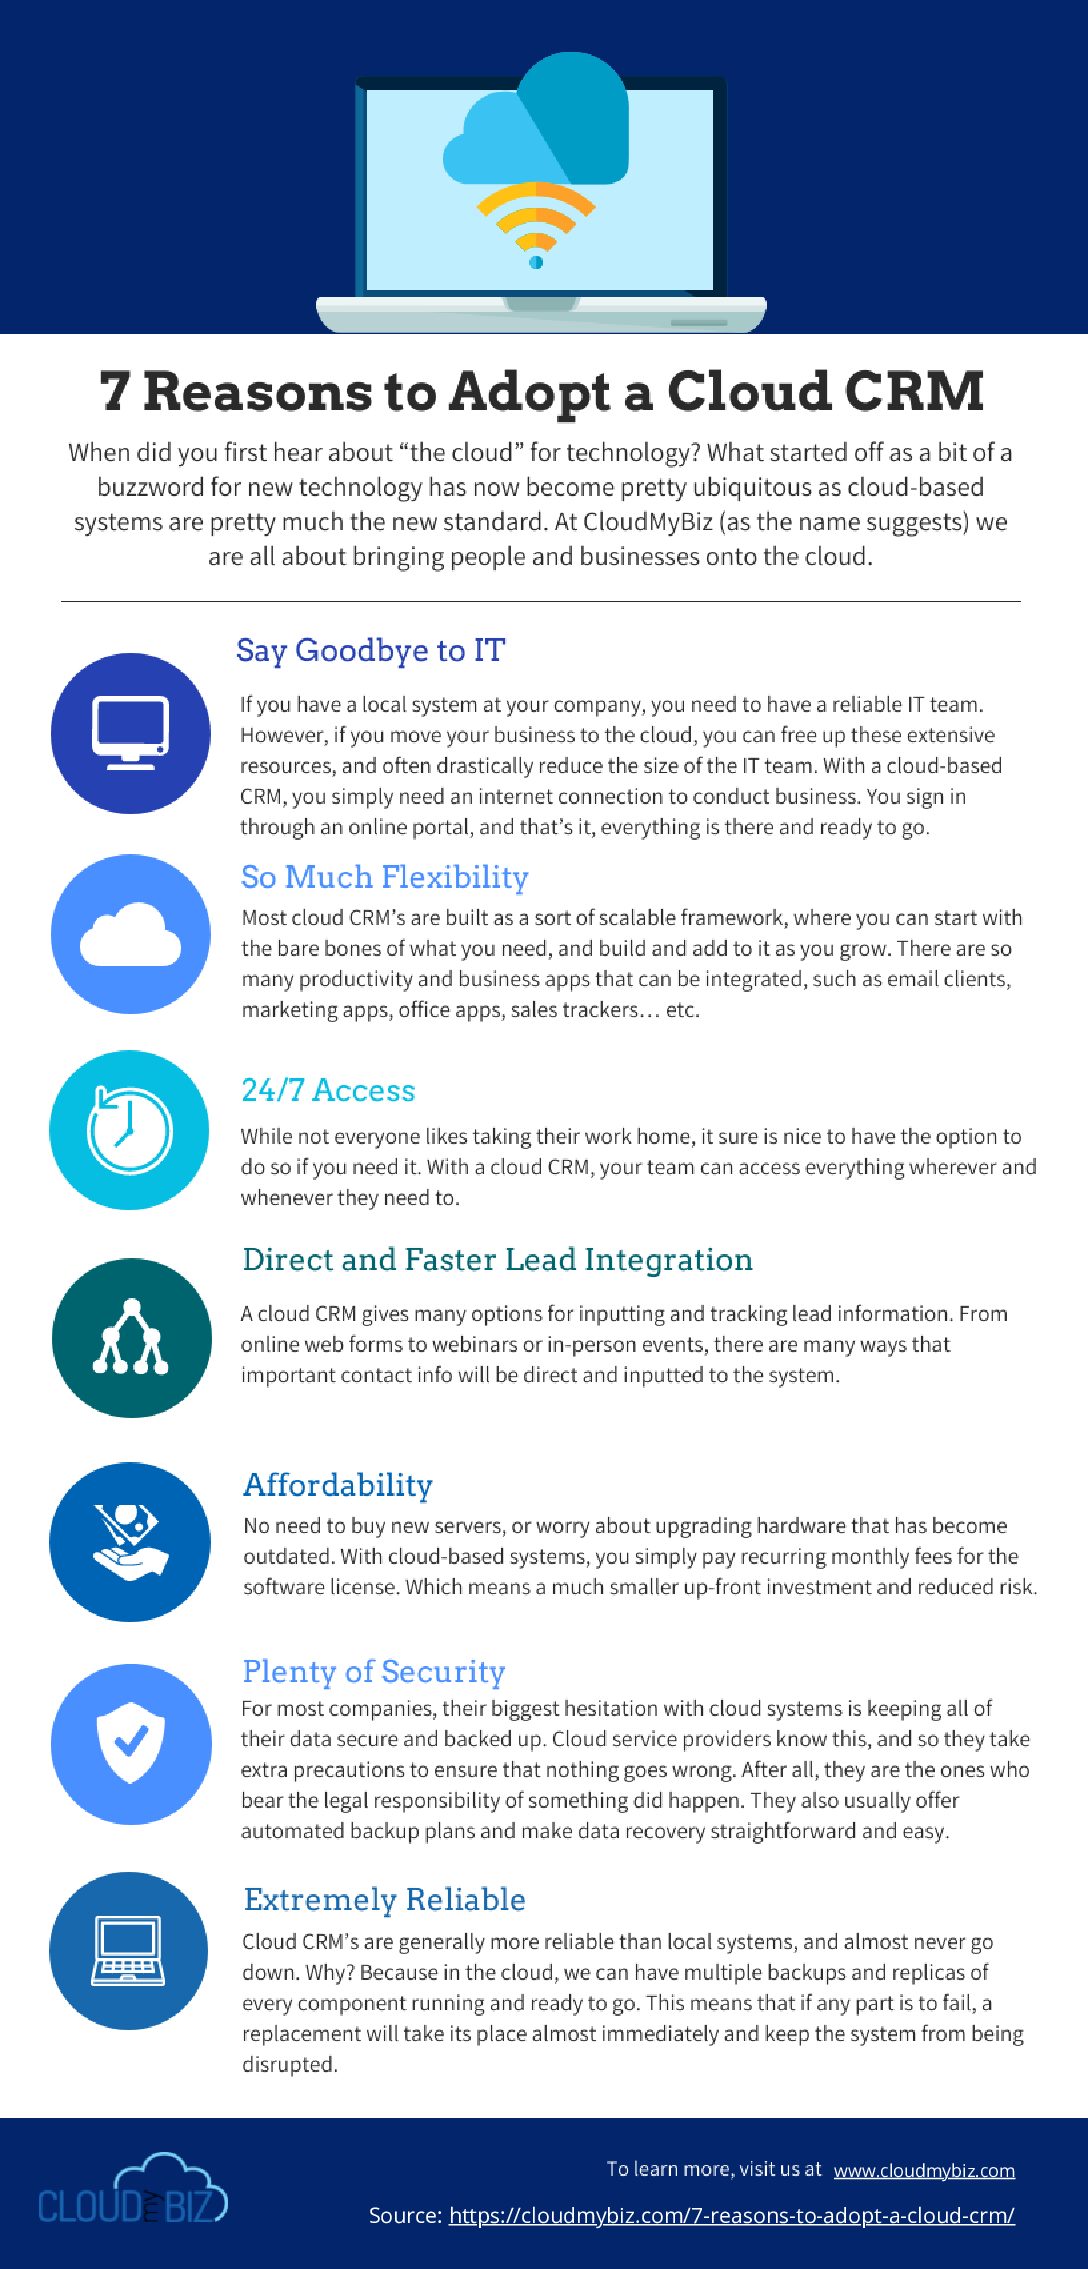 7 Reasons to Adopt a Cloud CRM